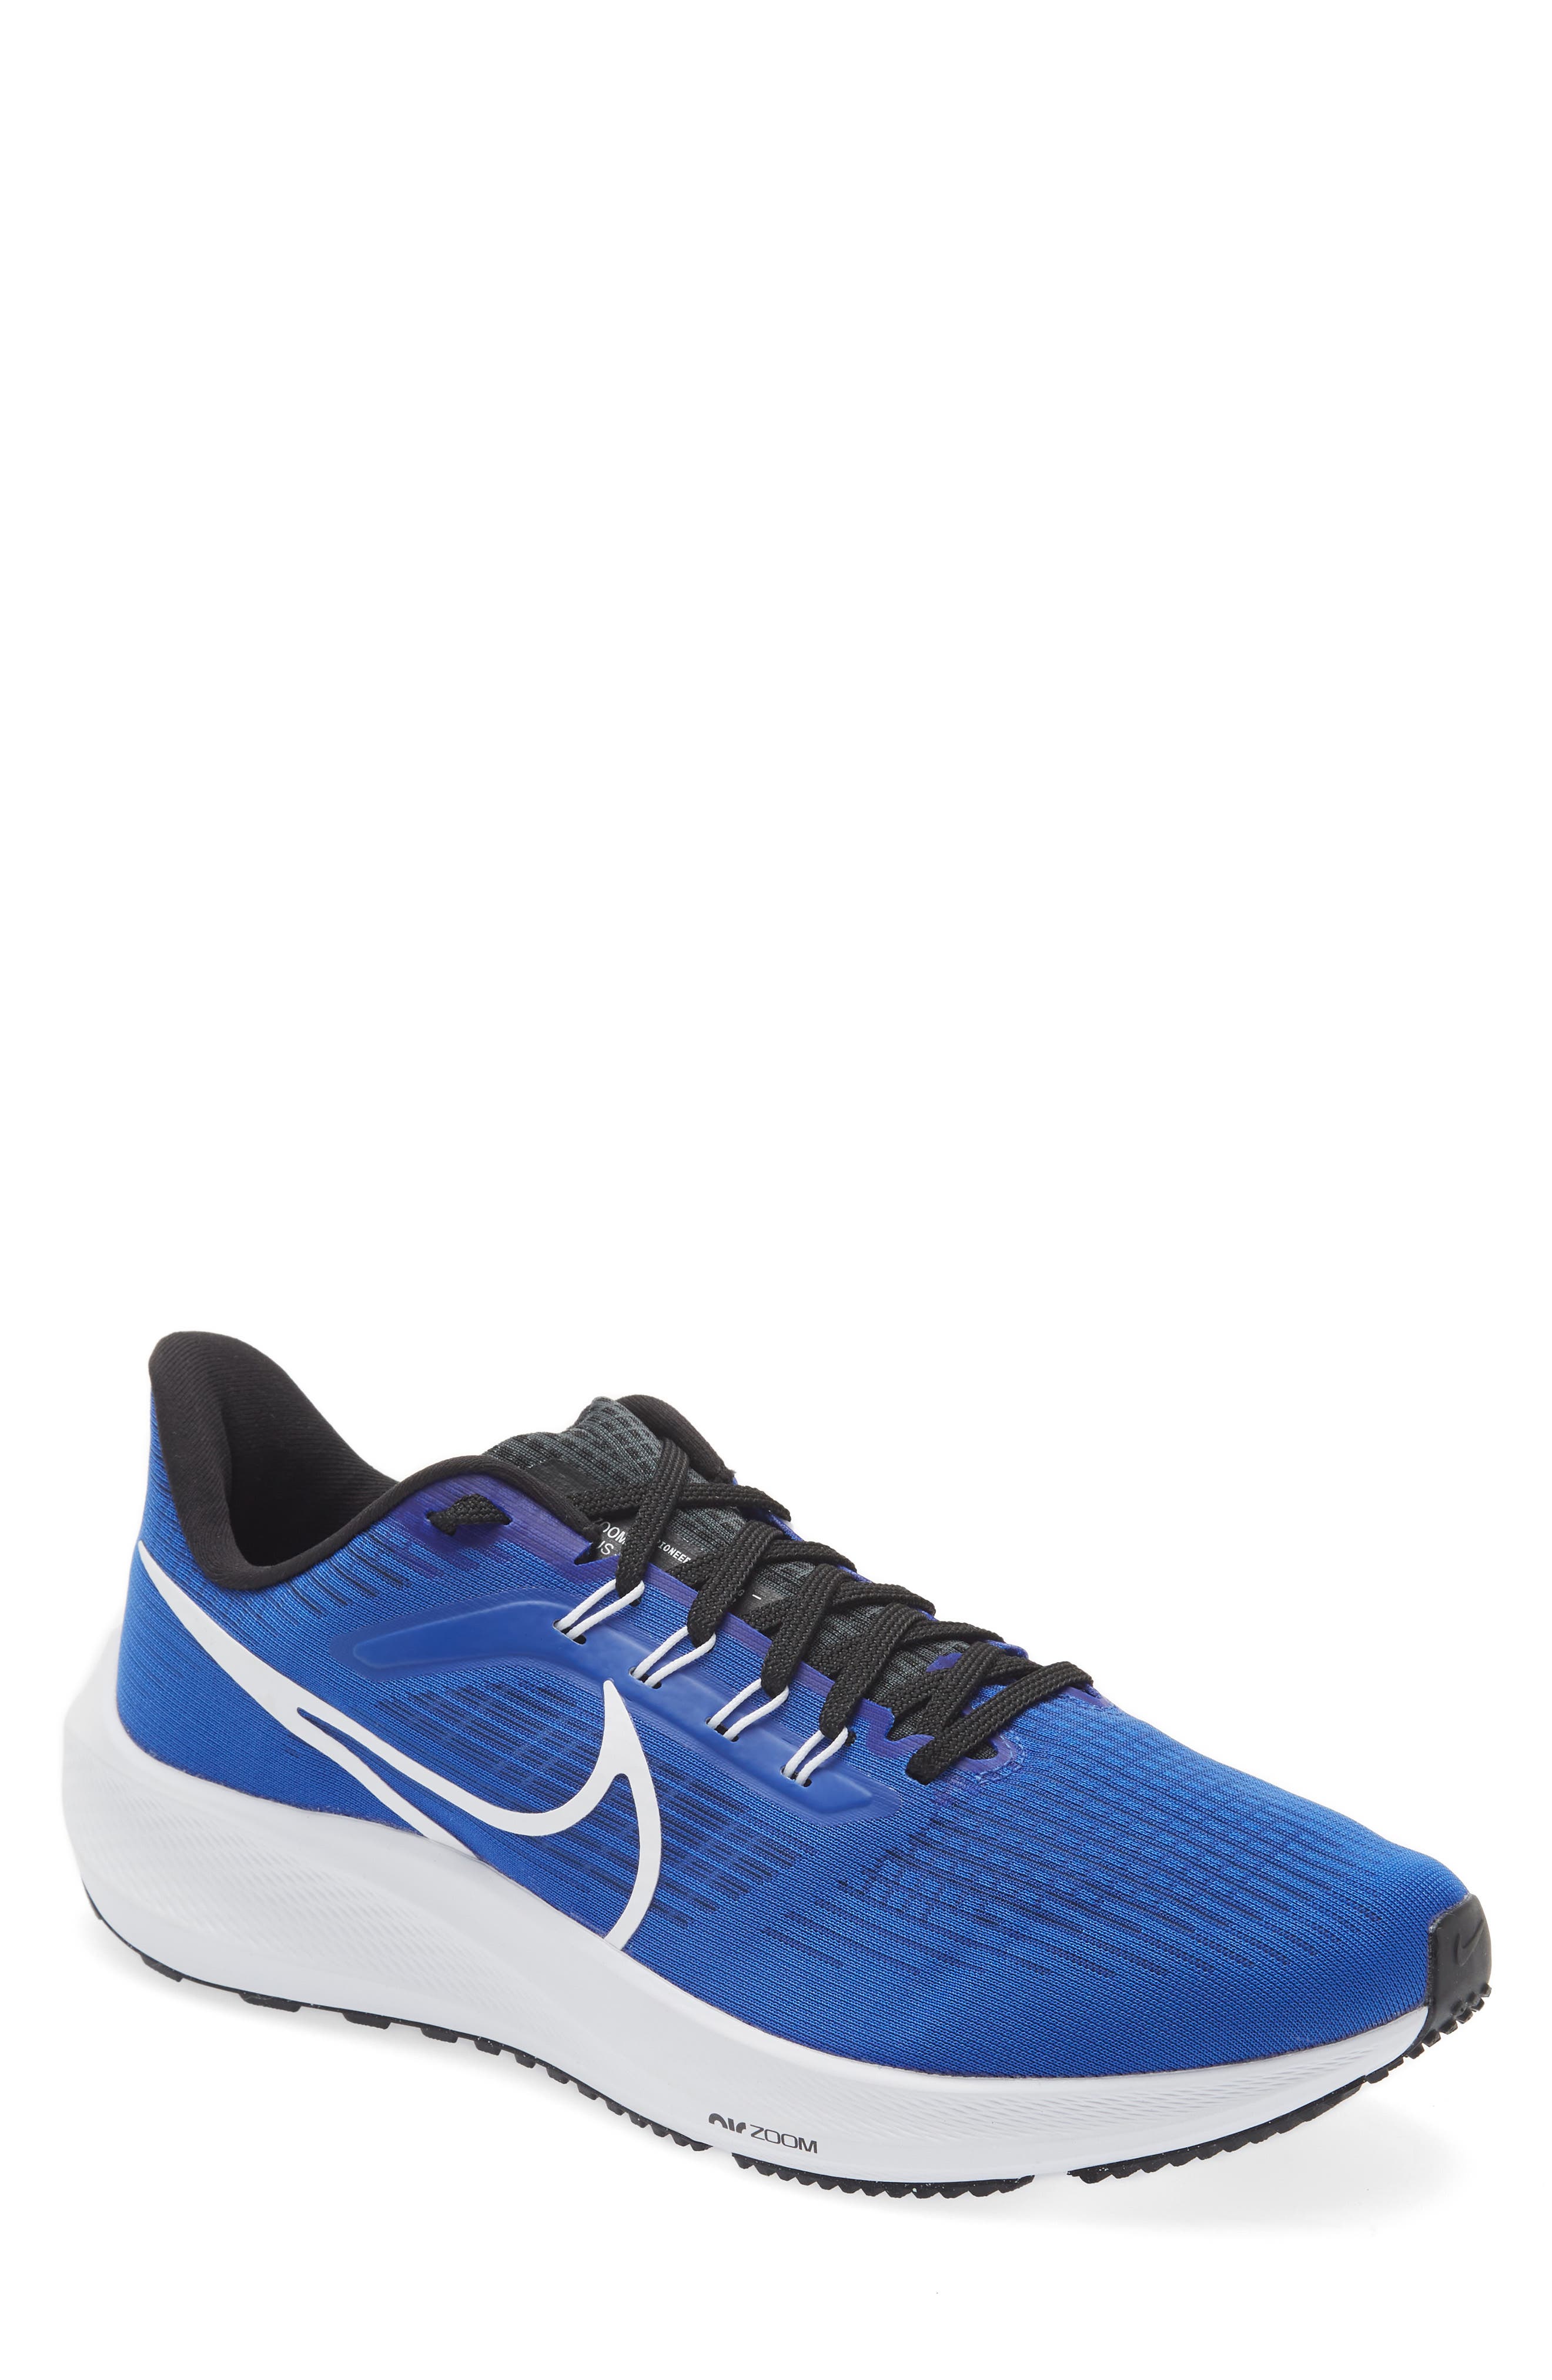 nike shoes that are blue